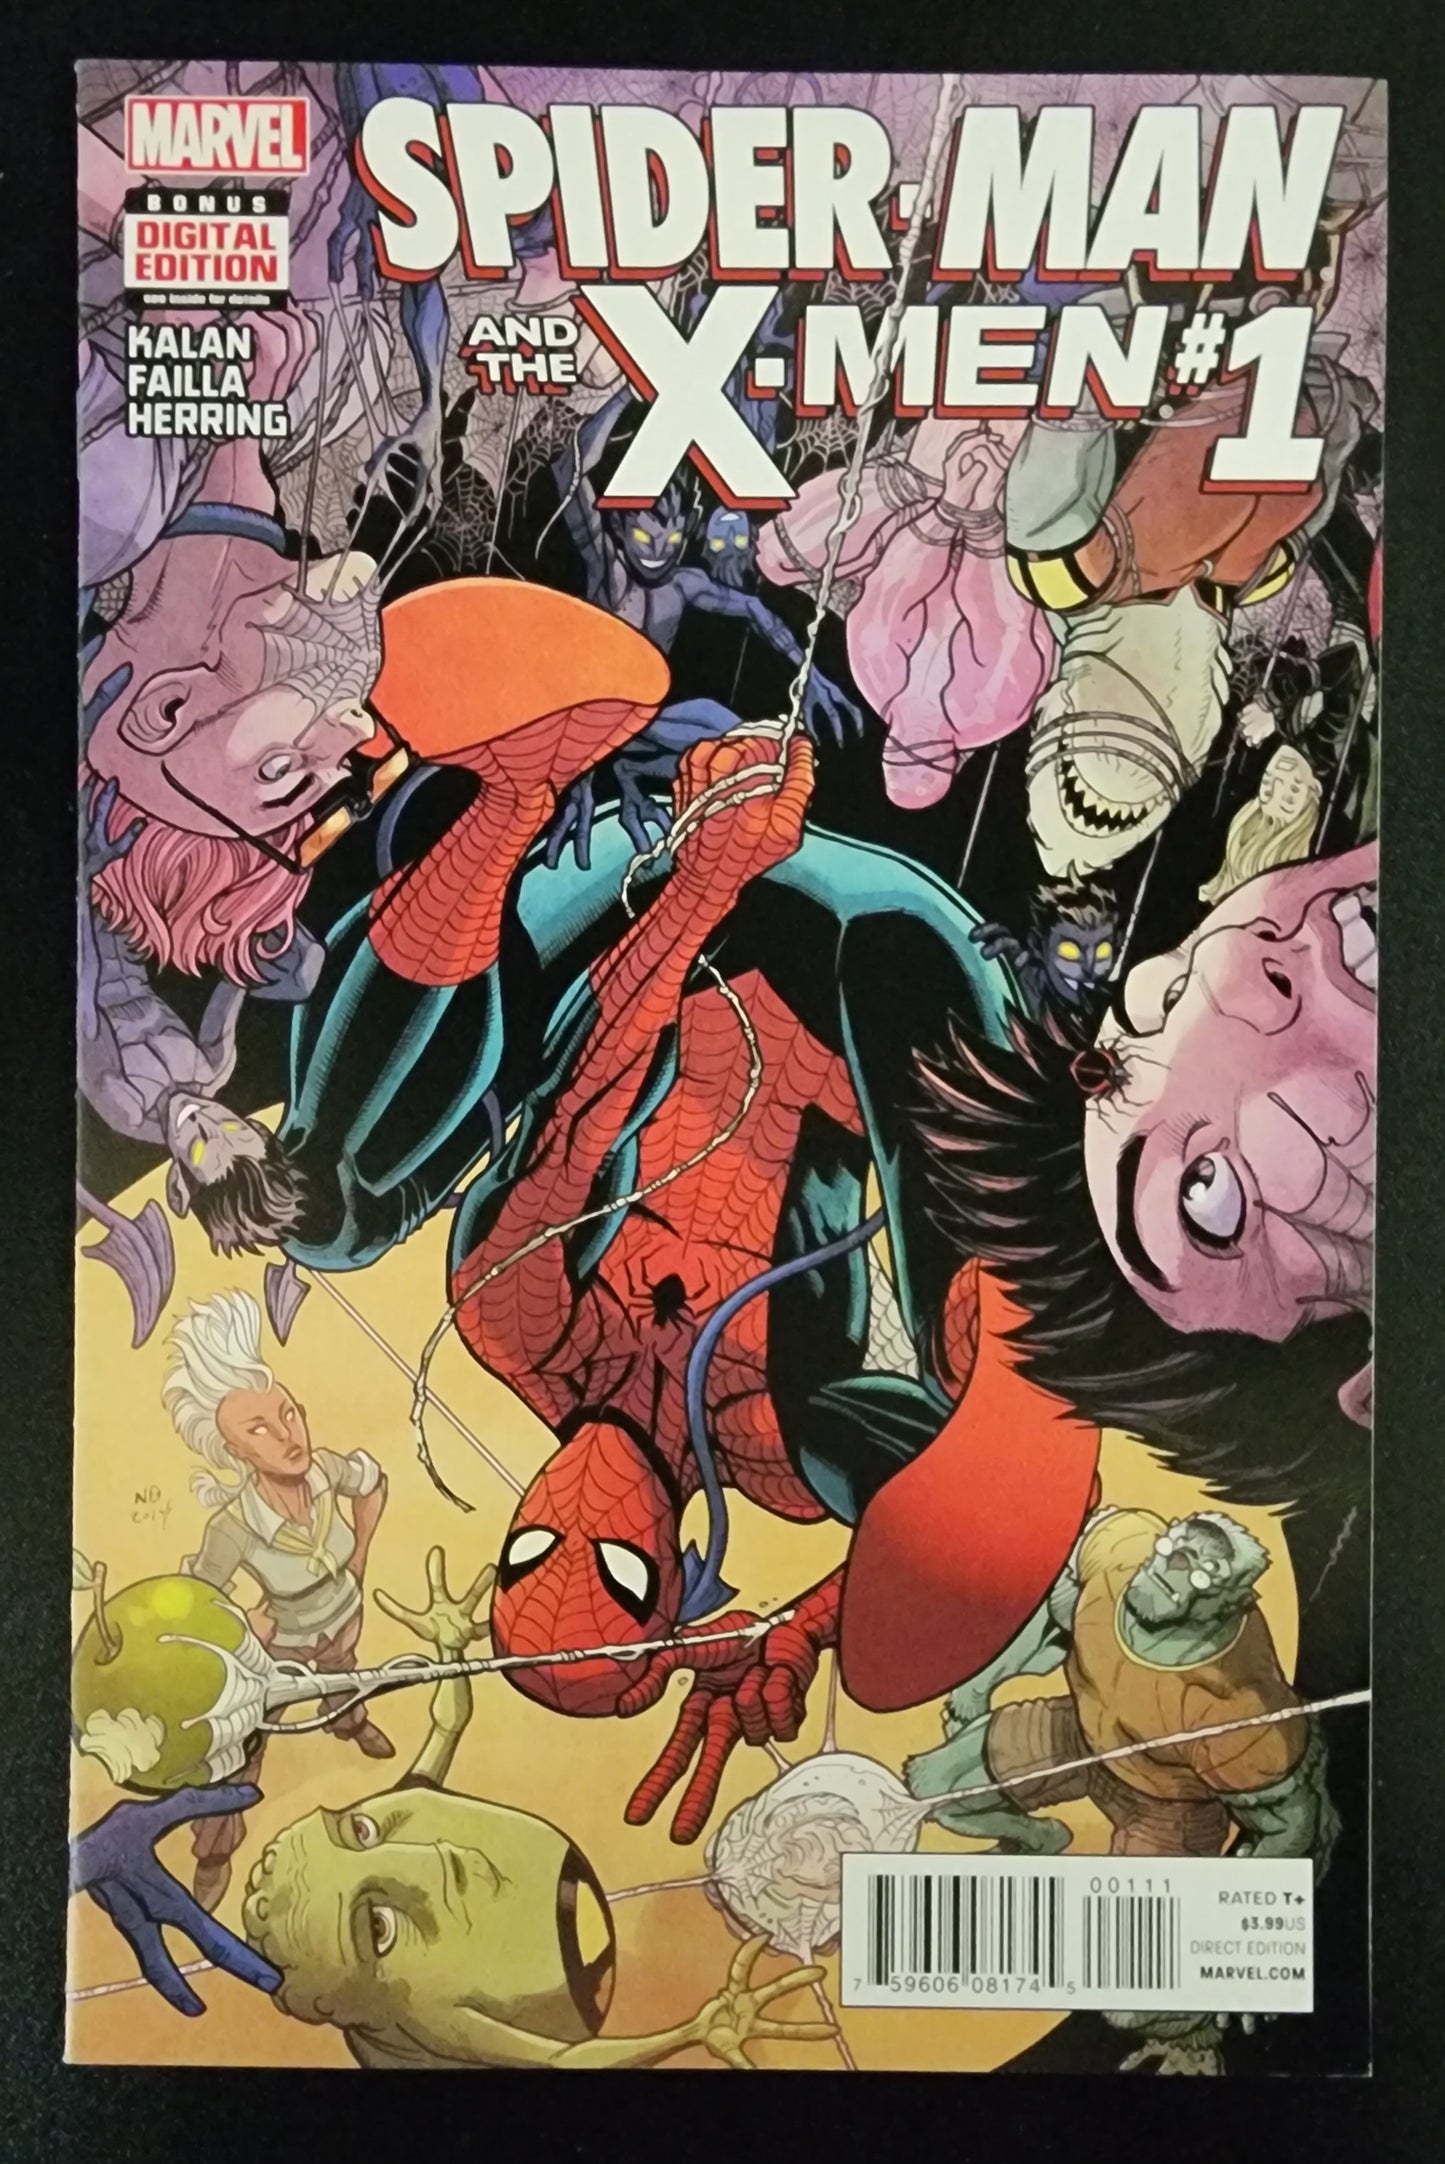 SPIDER-MAN AND THE X-MEN #1 2014